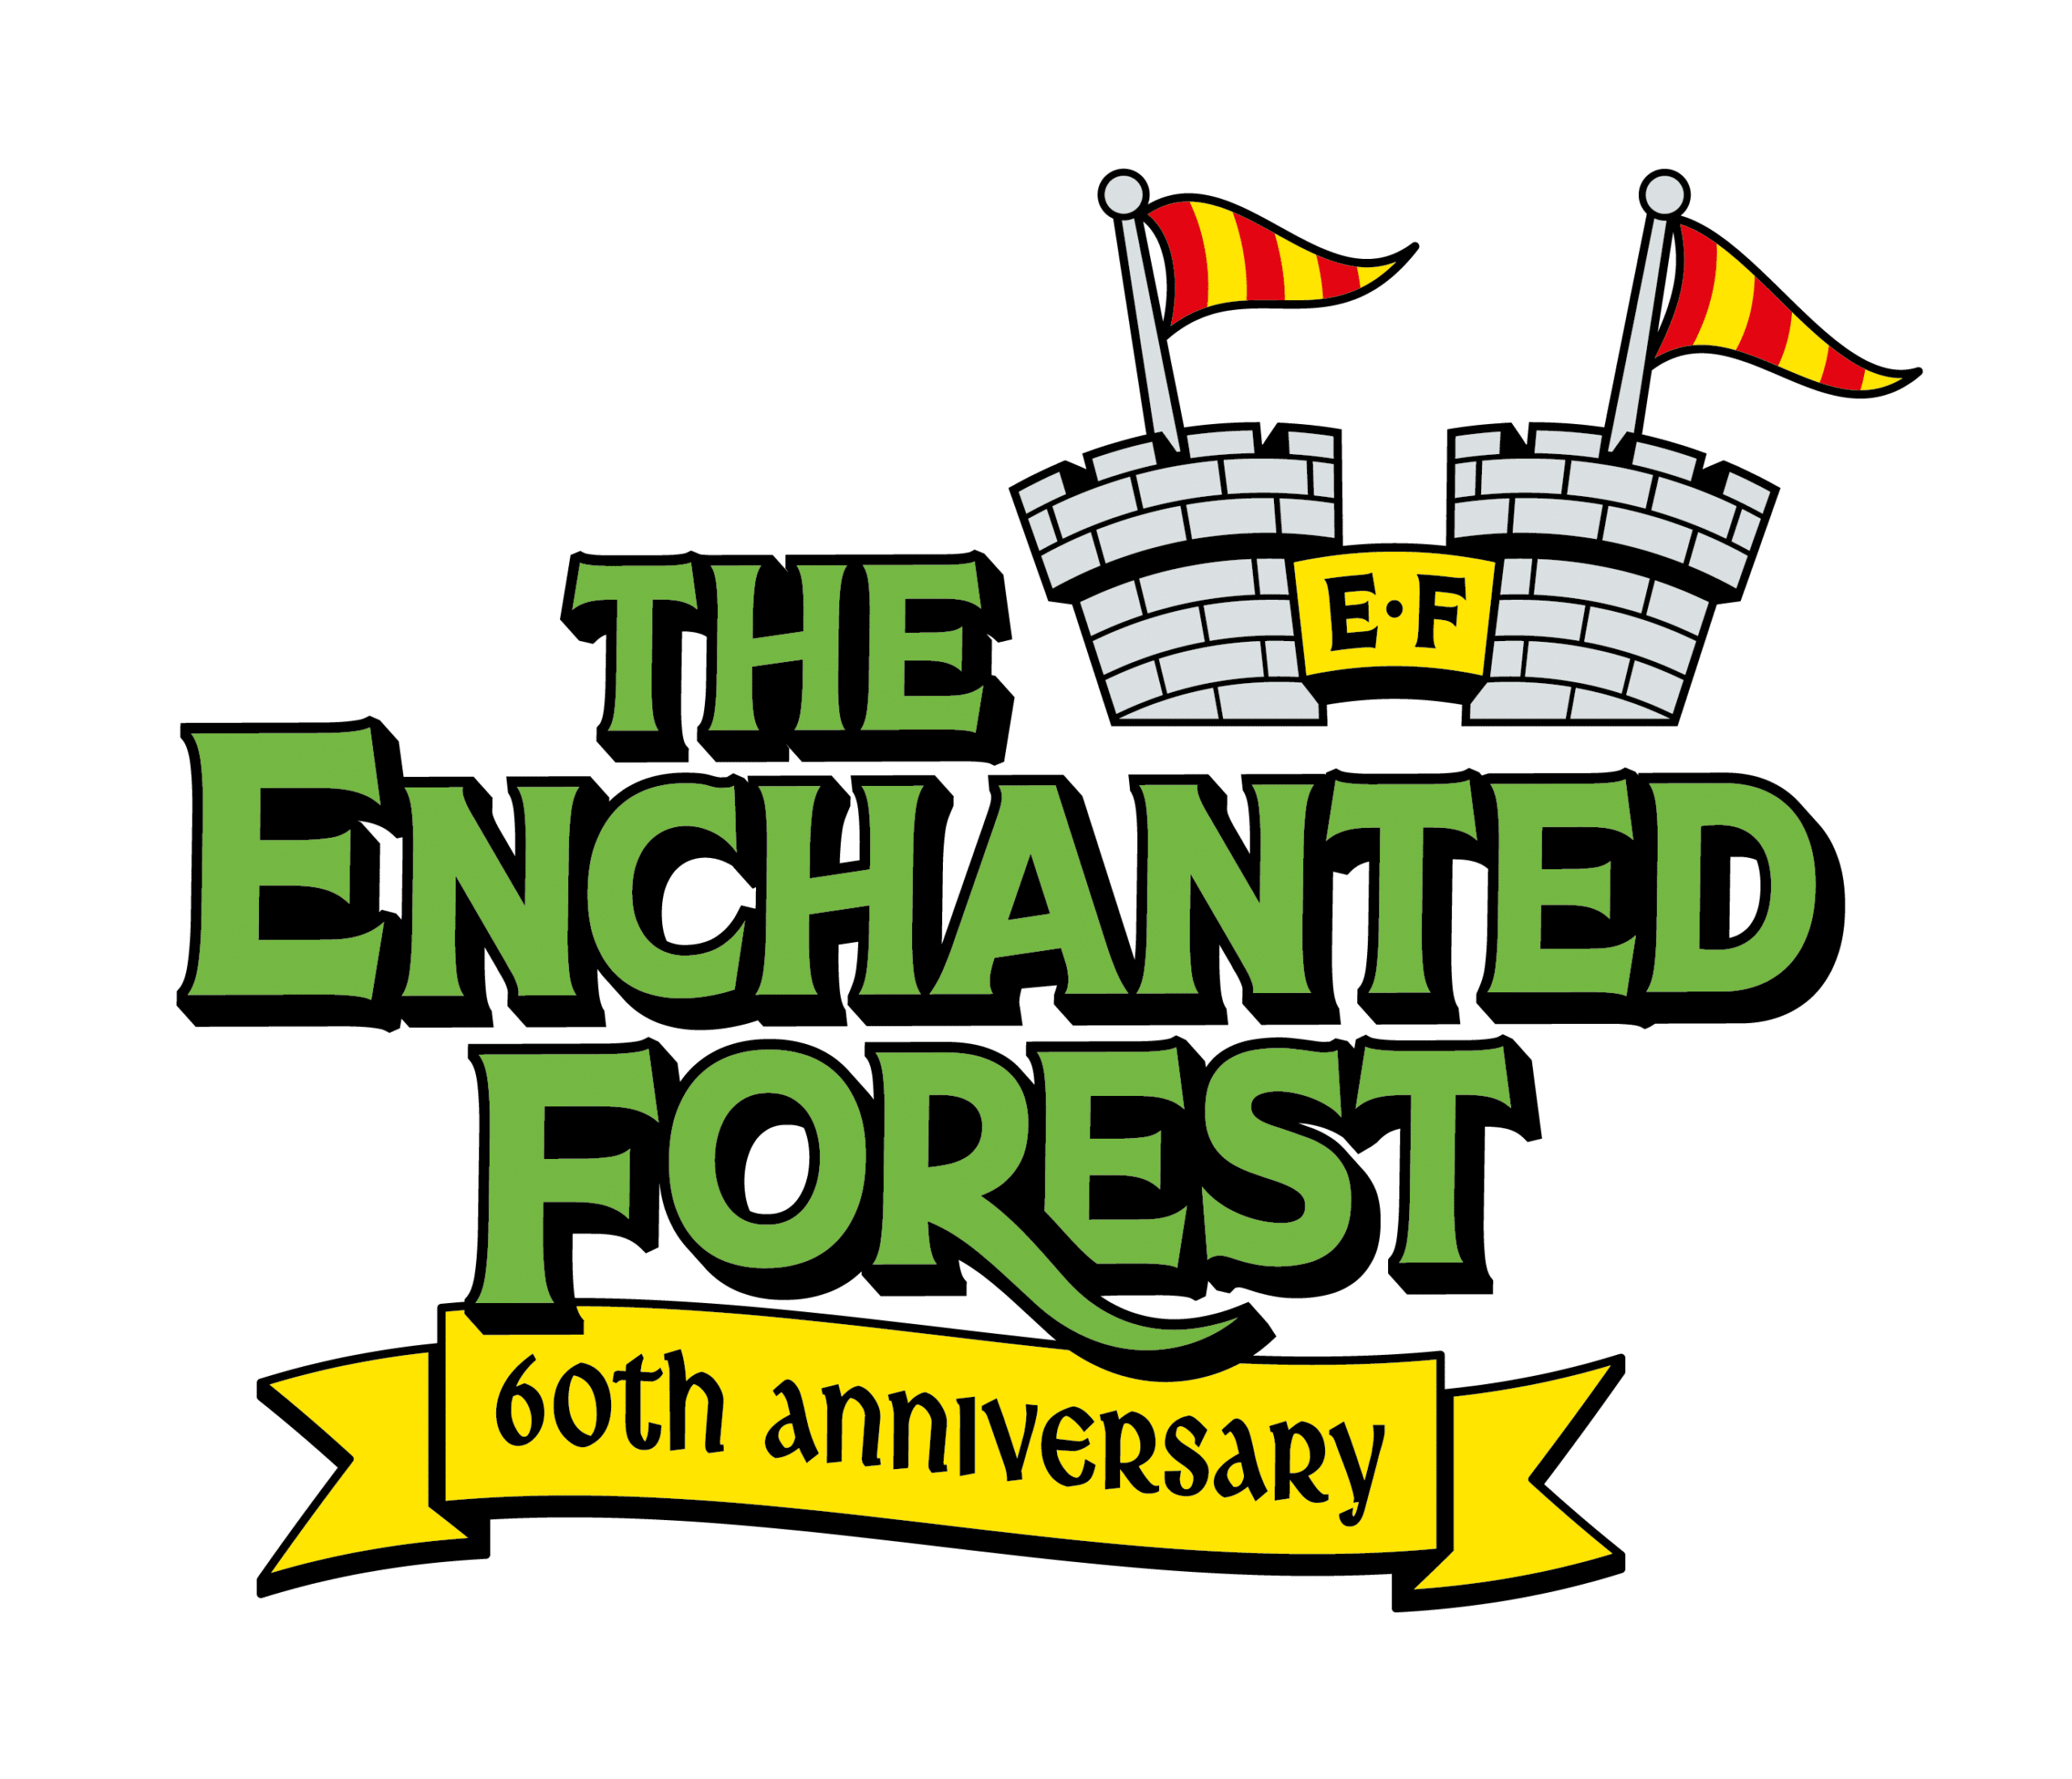 The Enchanted Forest Anniversary Logo